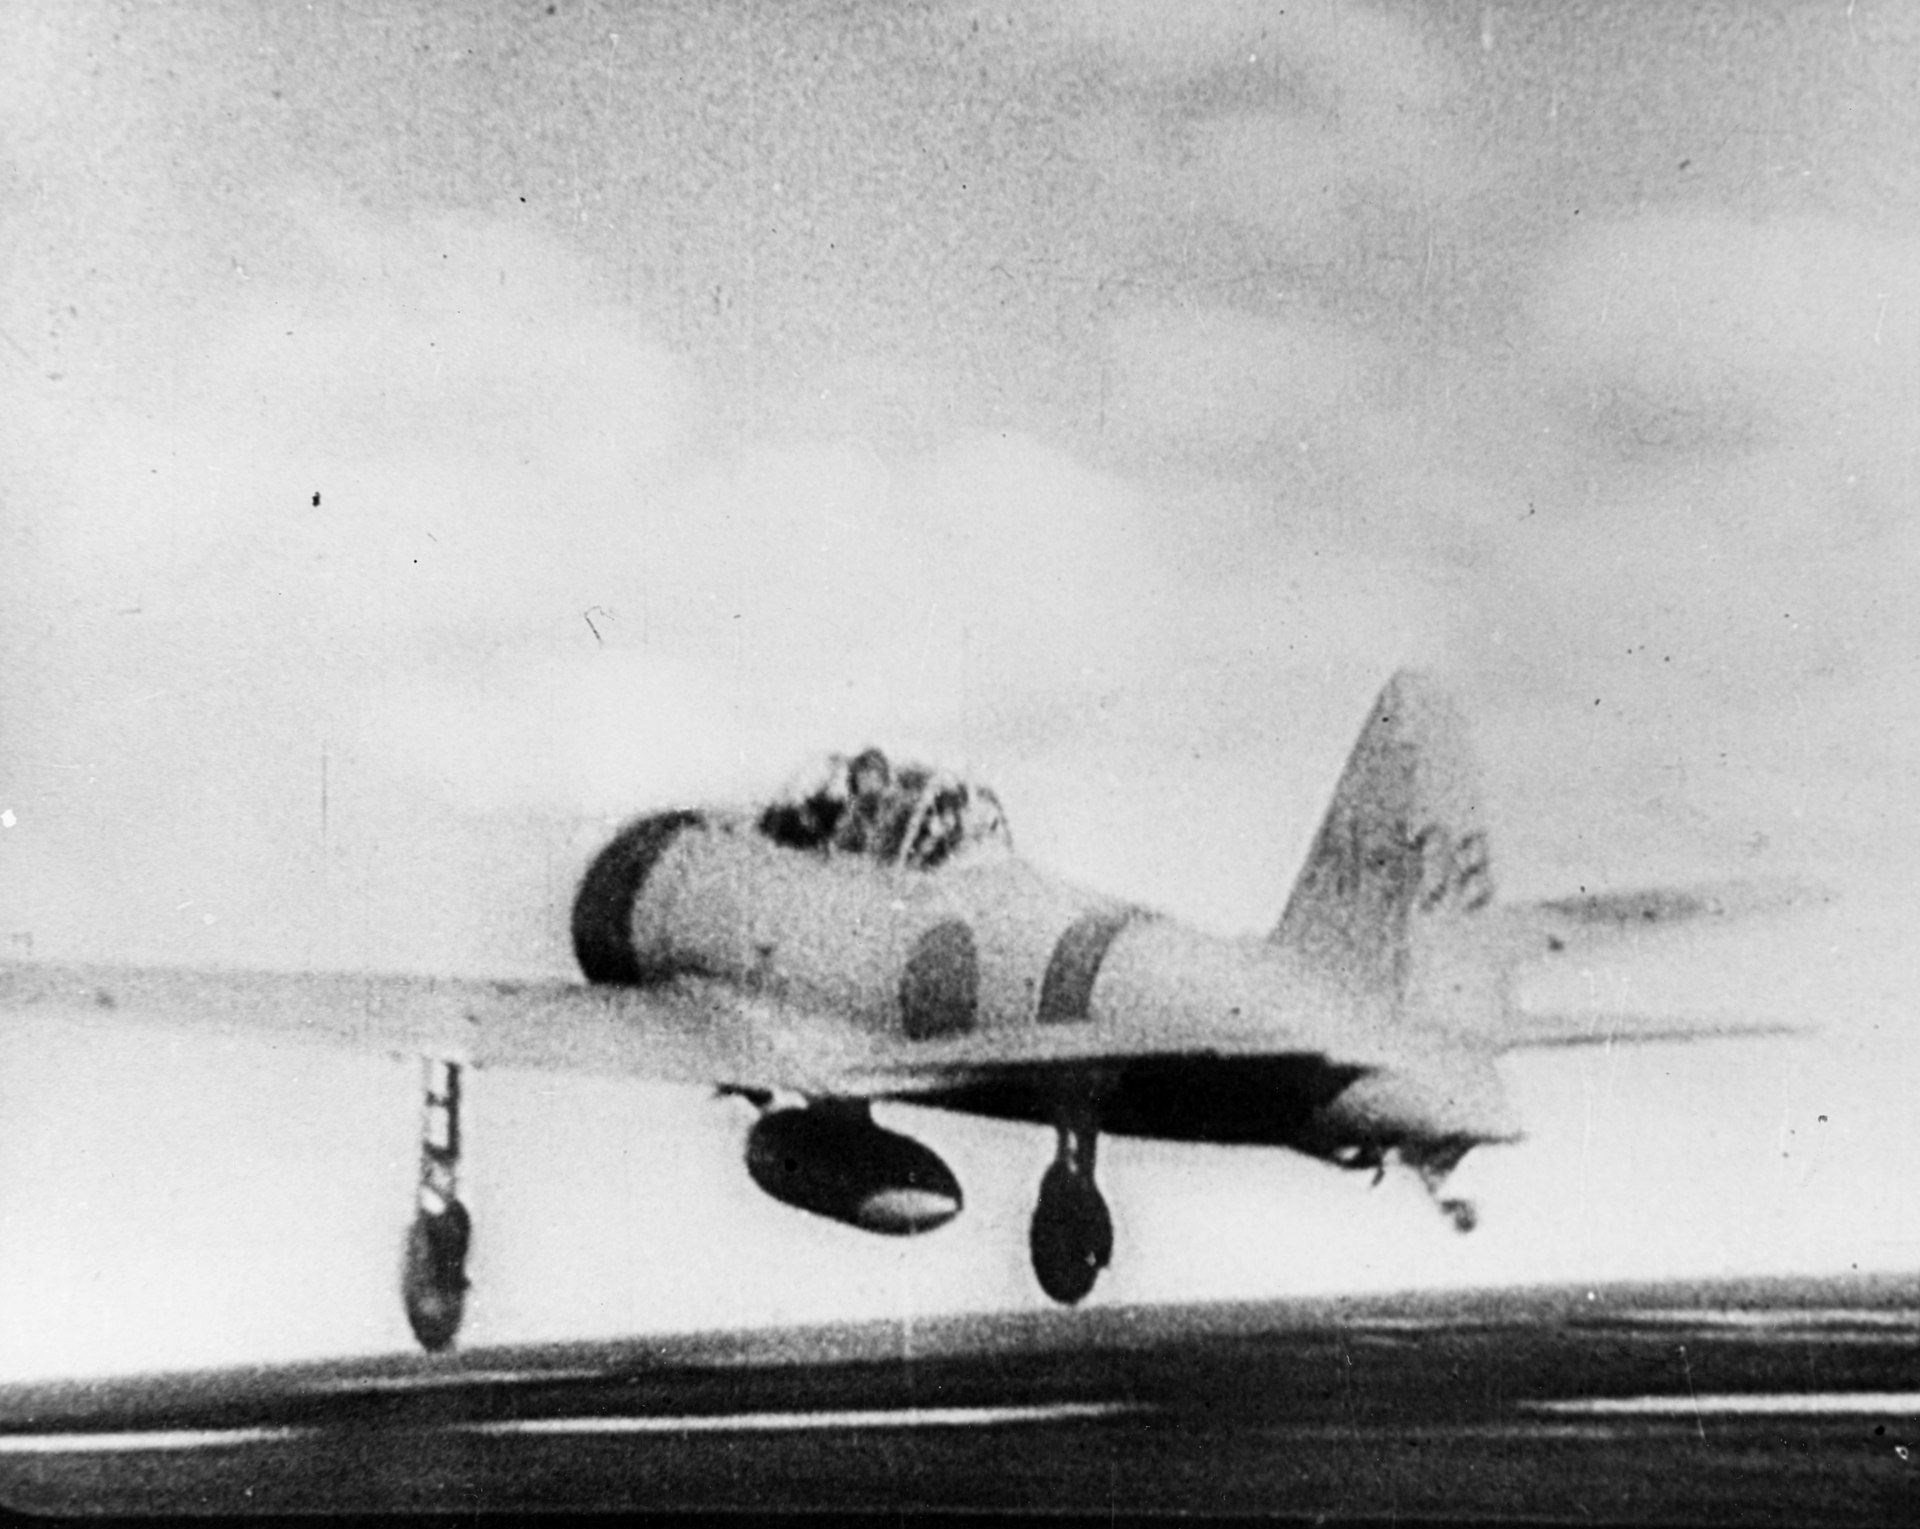 Zero Model 21 takes off from the aircraft carrier Akagi, to attack Pearl Harbor.